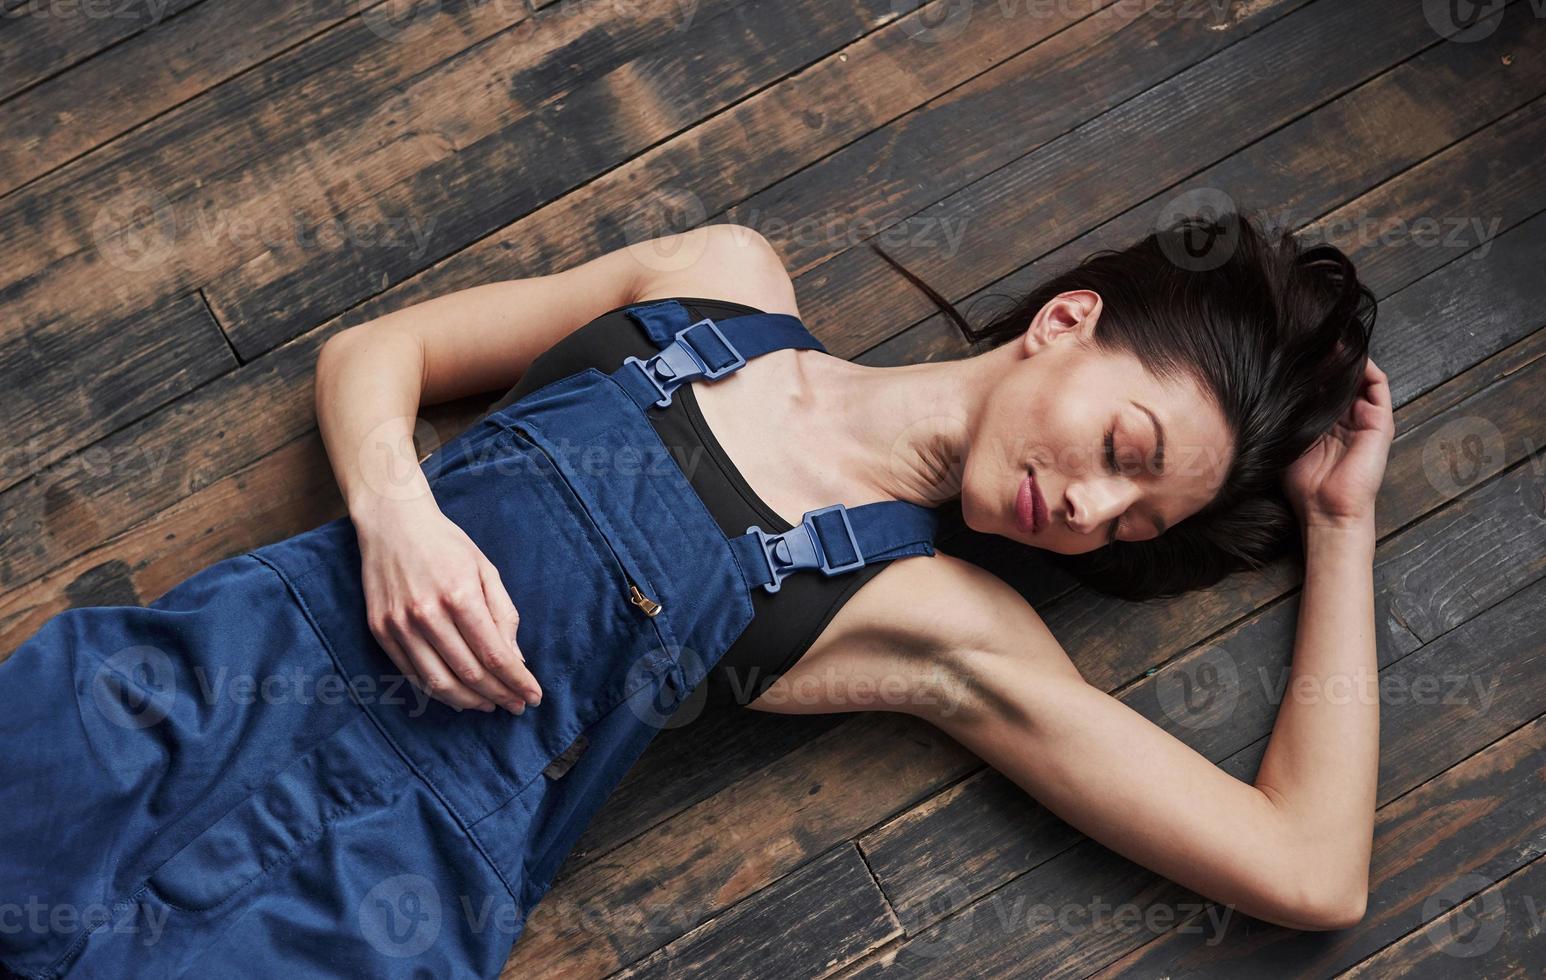 With eyes closed. Girl in the blue uniform for the work is lying on wooden floor having relax photo